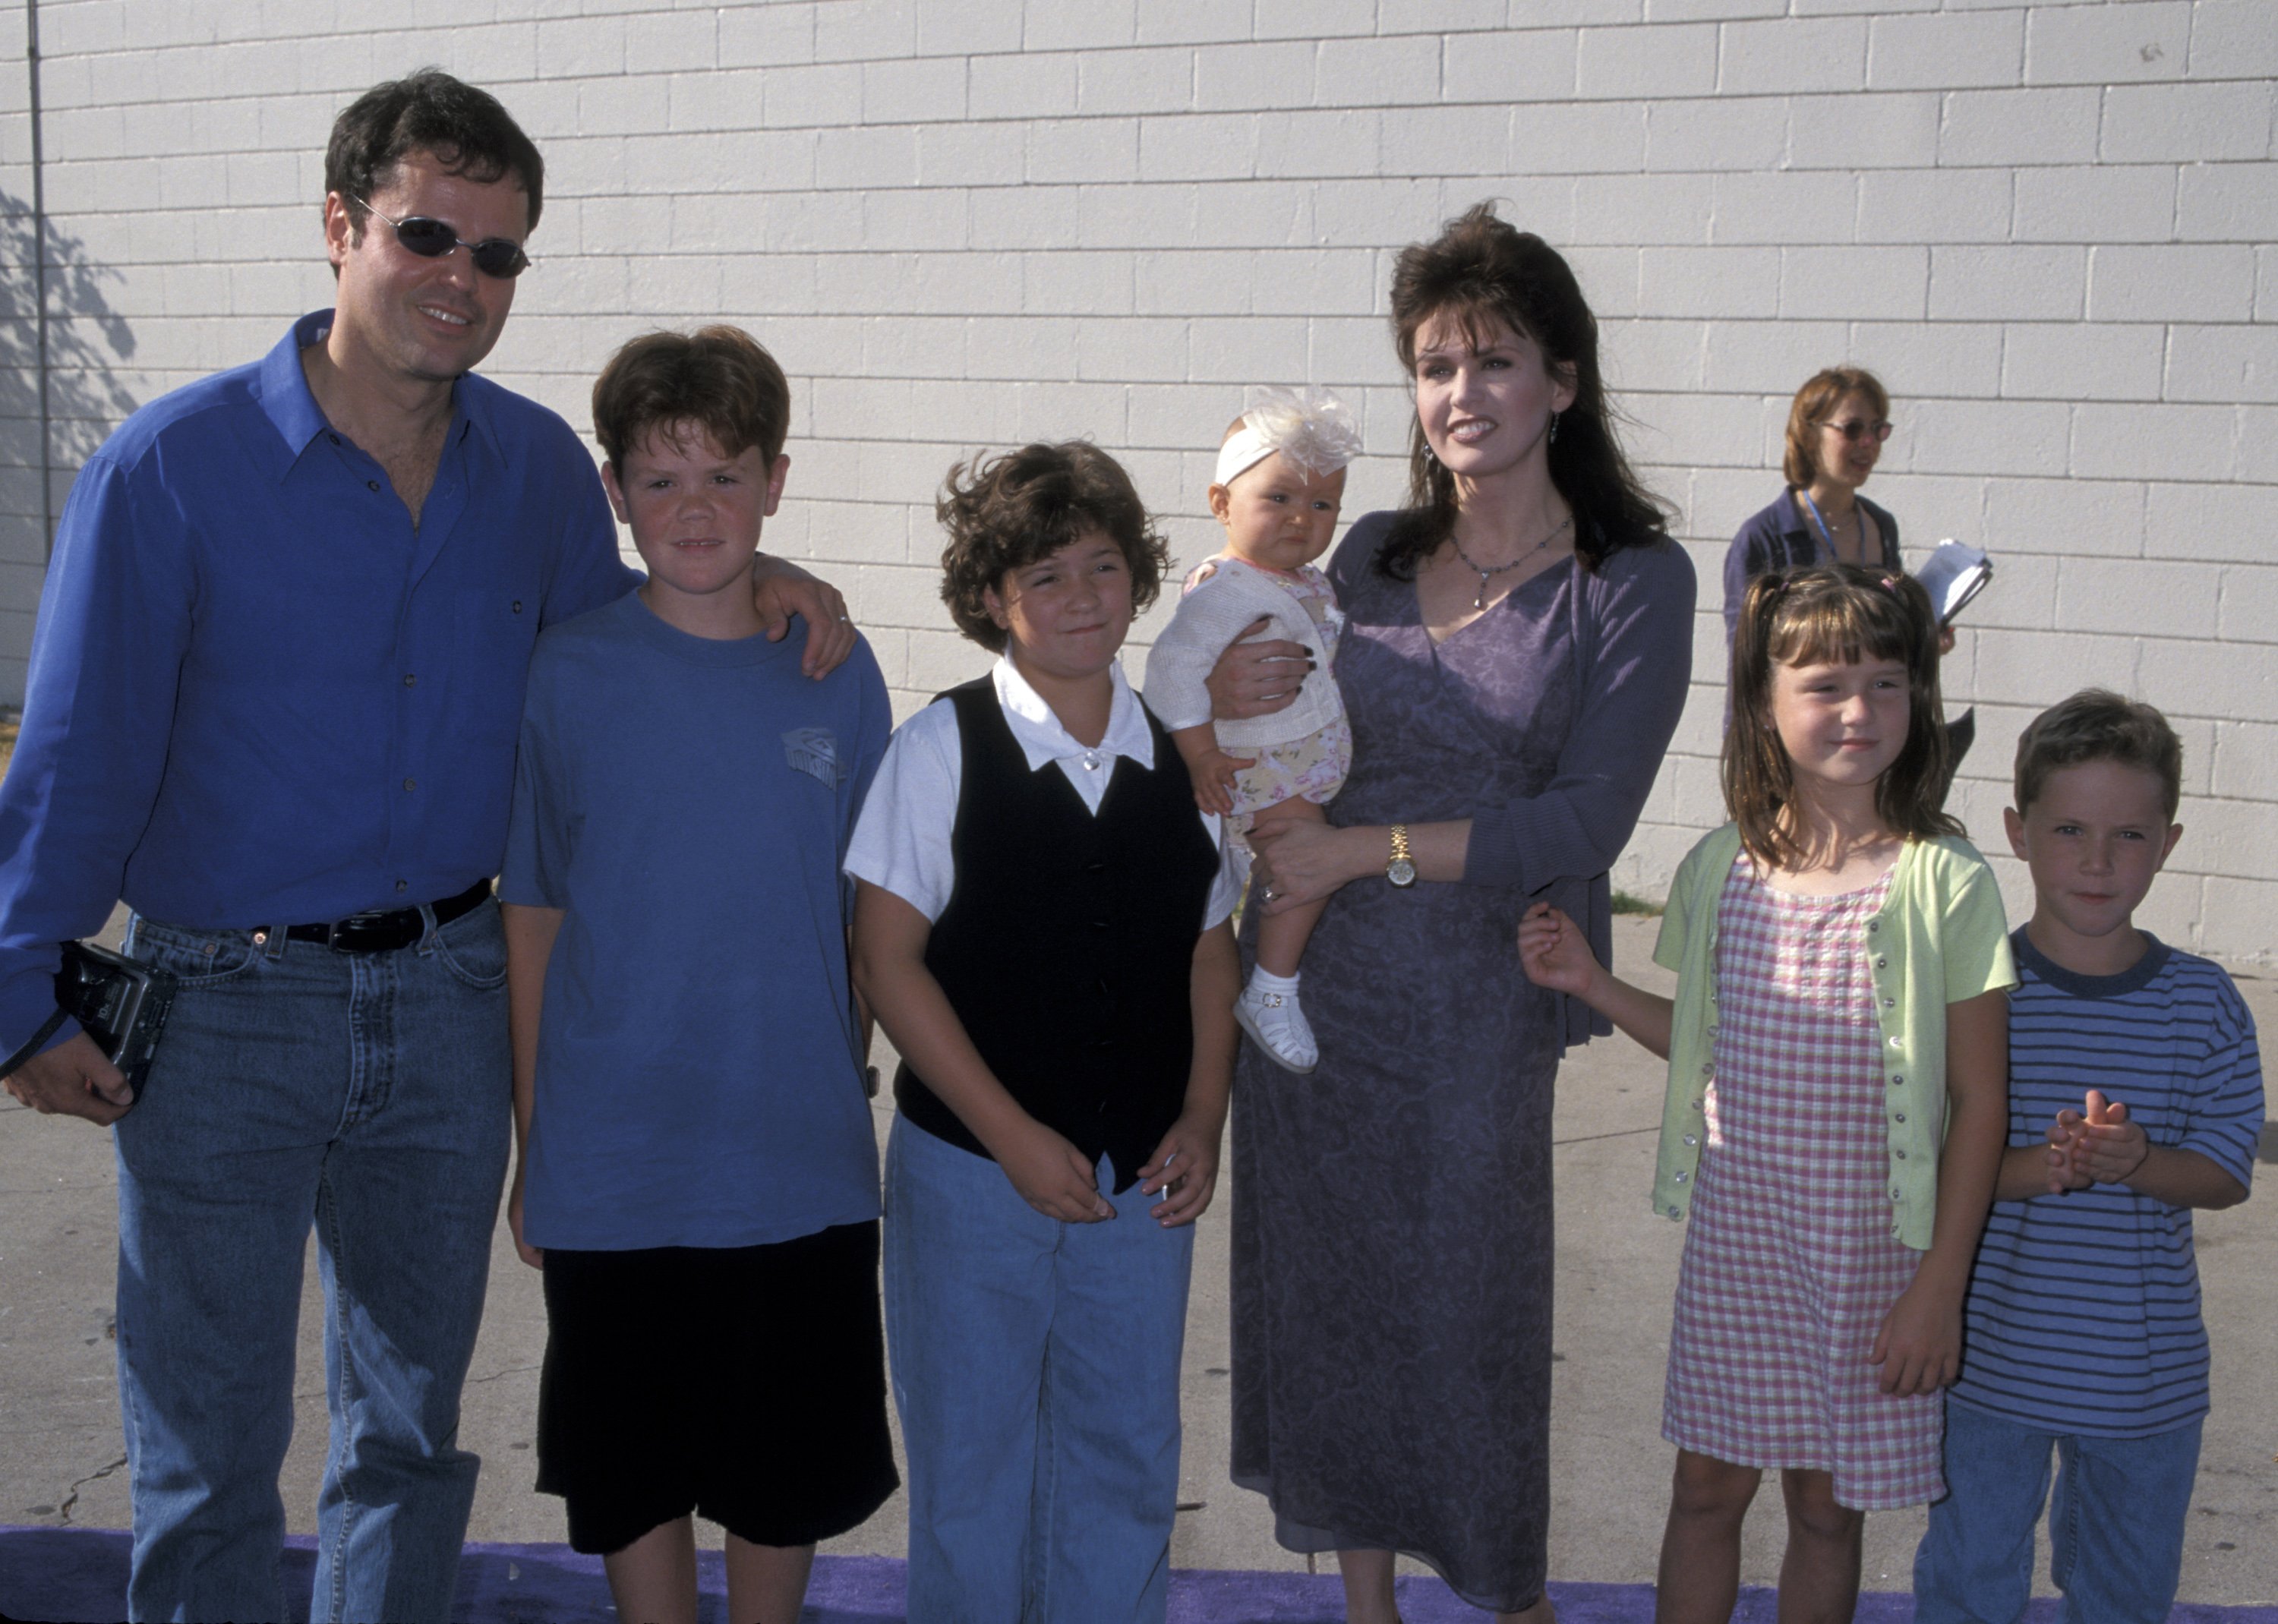 Donny Osmond, Marie Osmond, and children at the Sports Arena in Los Angeles, California, July 2, 1998 | Source: Getty Images